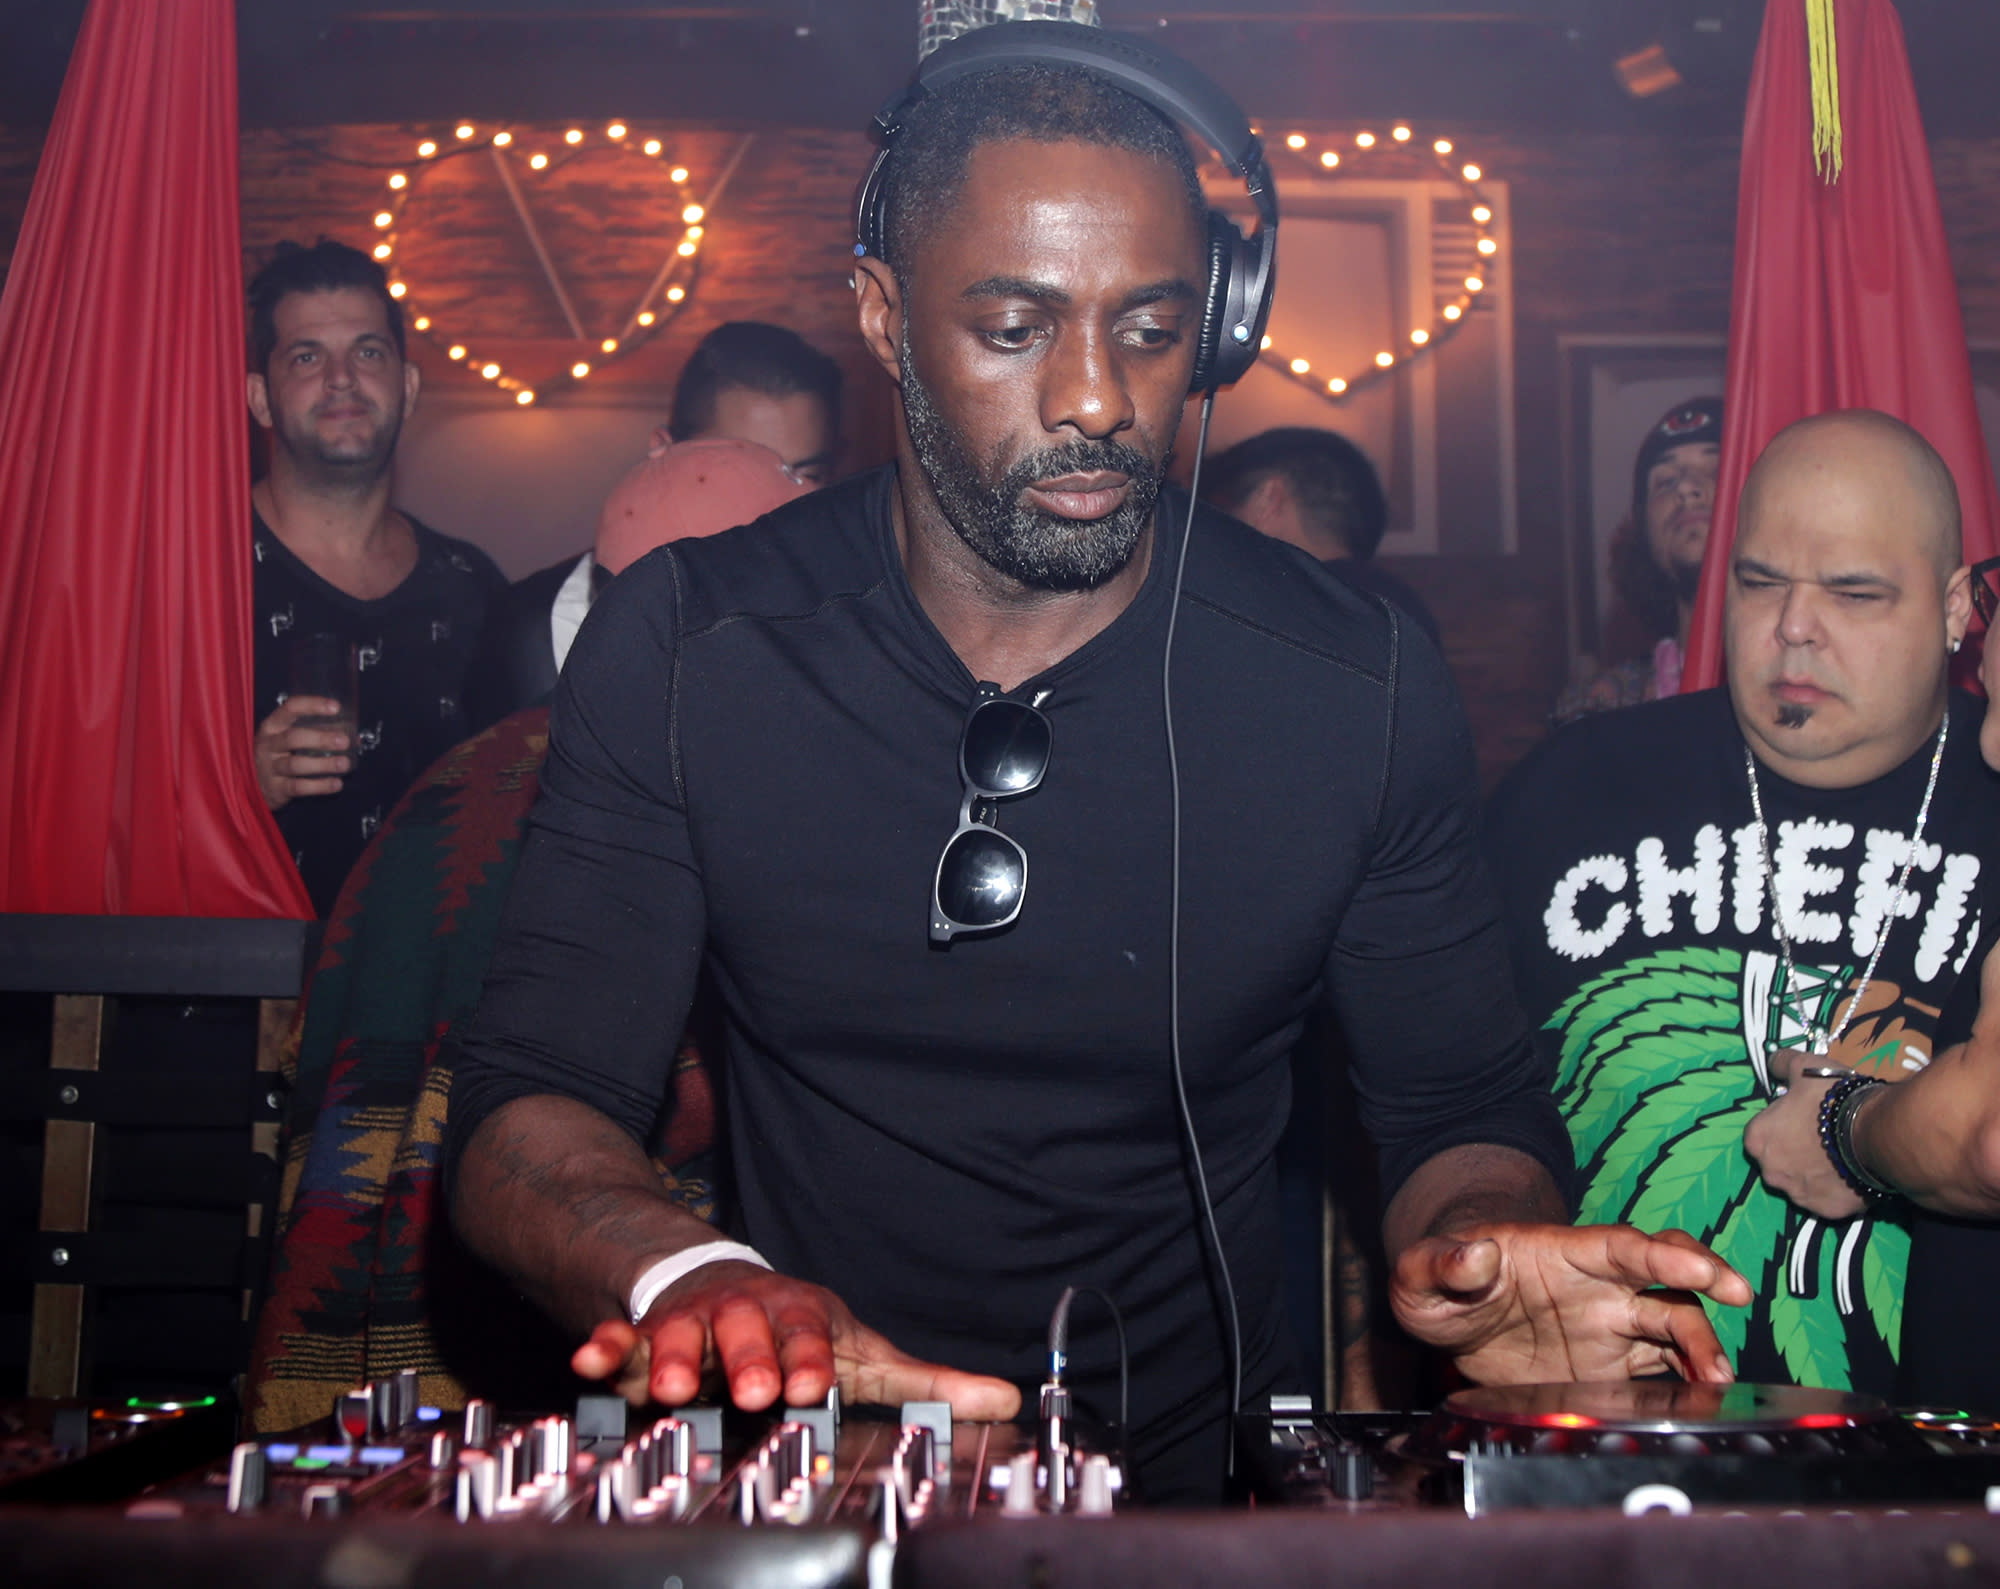 Idris Elba to Make His Coachella Debut as a DJ After Being Named PEOPLE